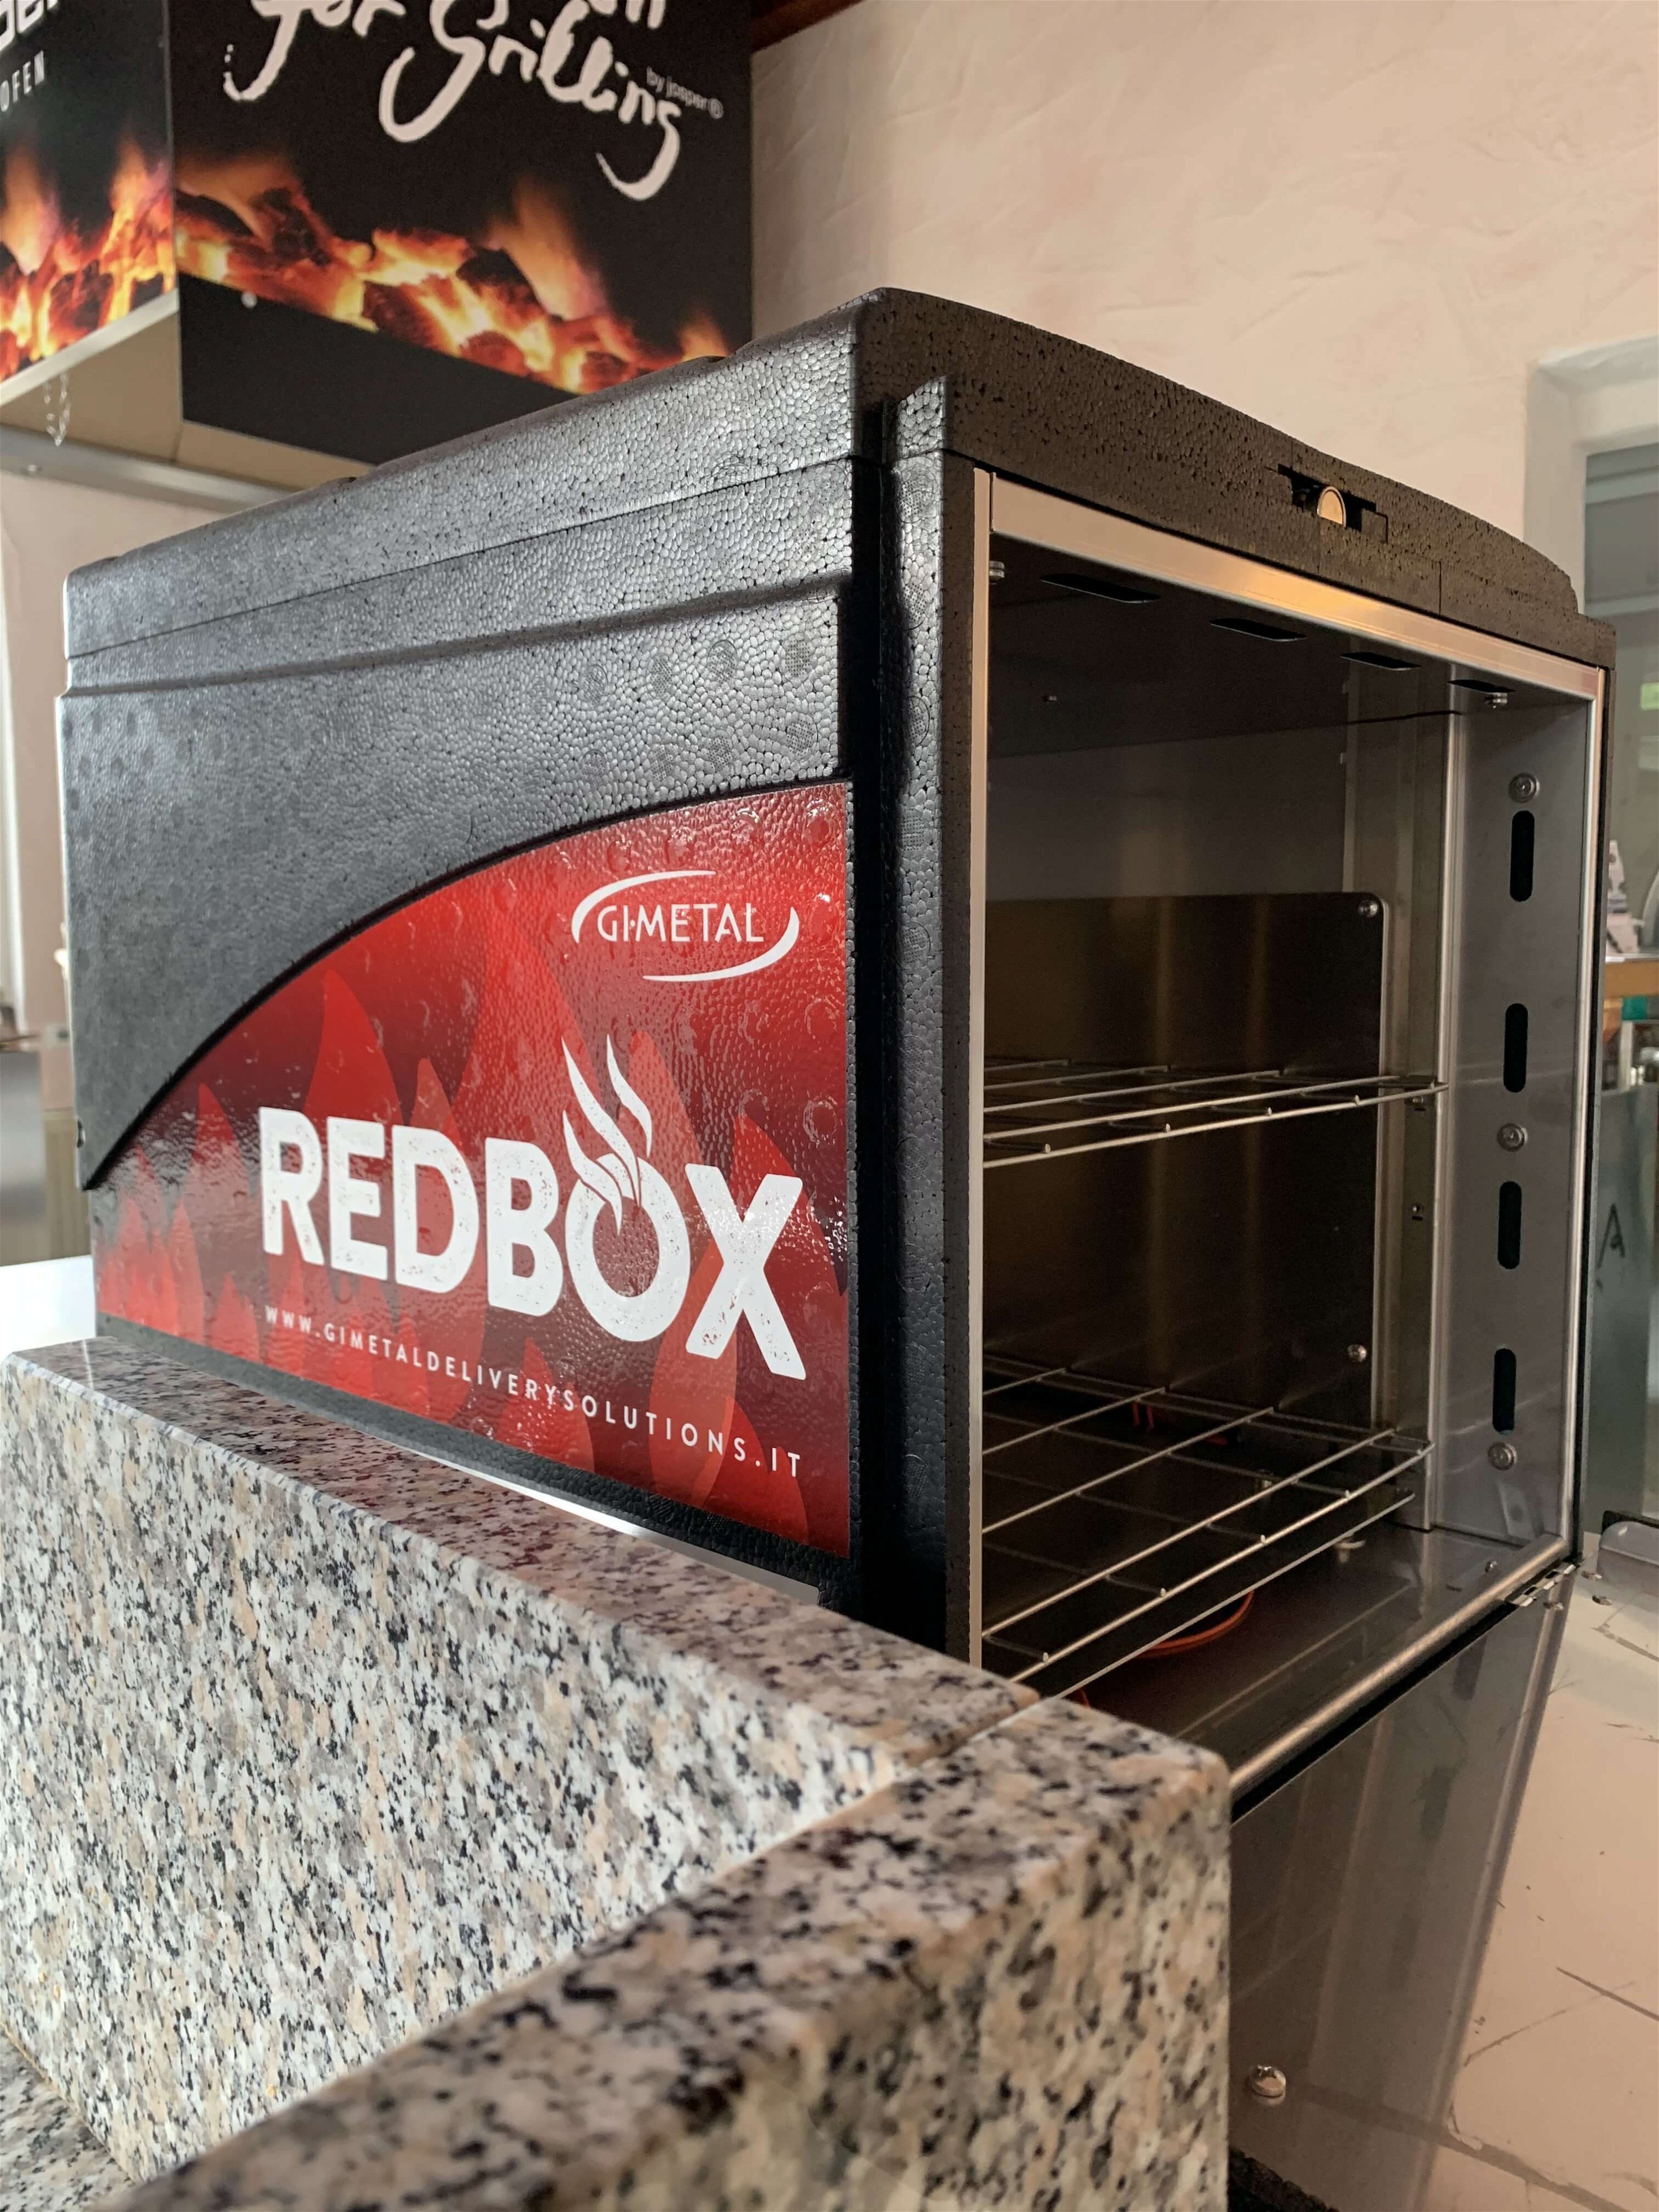 Heated box for pizza delivery services: Gi.Metal Redbox, with thermometer and convection for 12 pizza boxes, 2.4kW